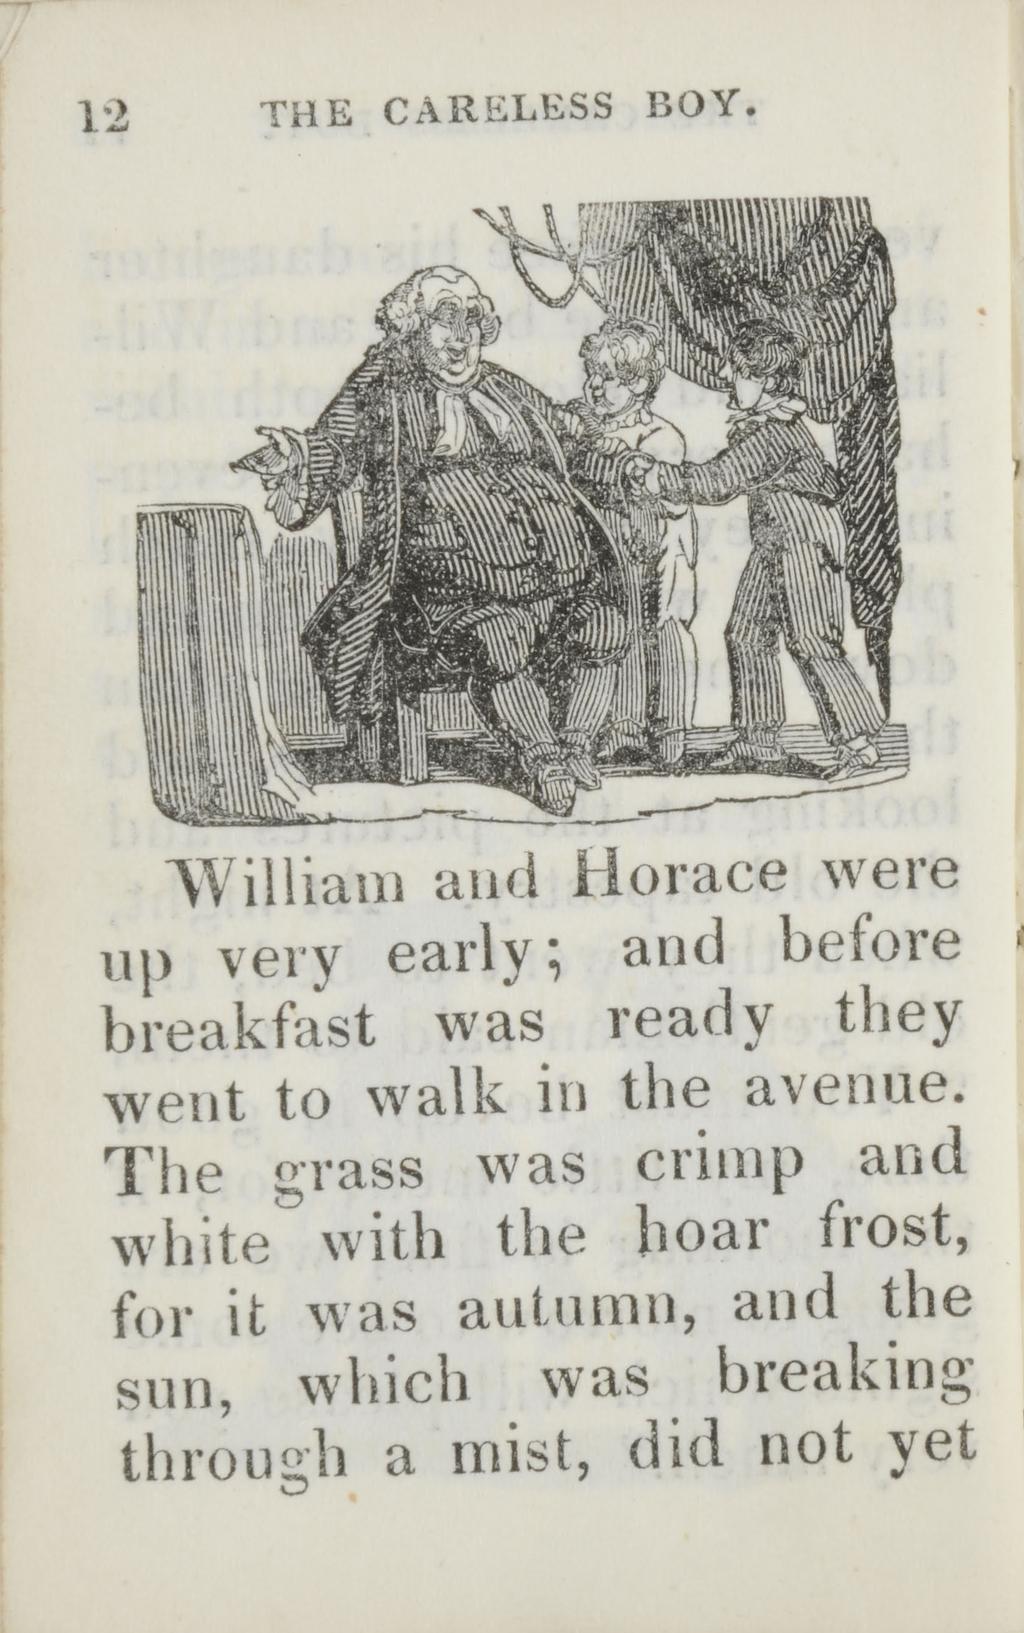 12 THE CARELESS BOY. William and Horace were up very early; and before breakfast was ready they went to walk in the avenue.